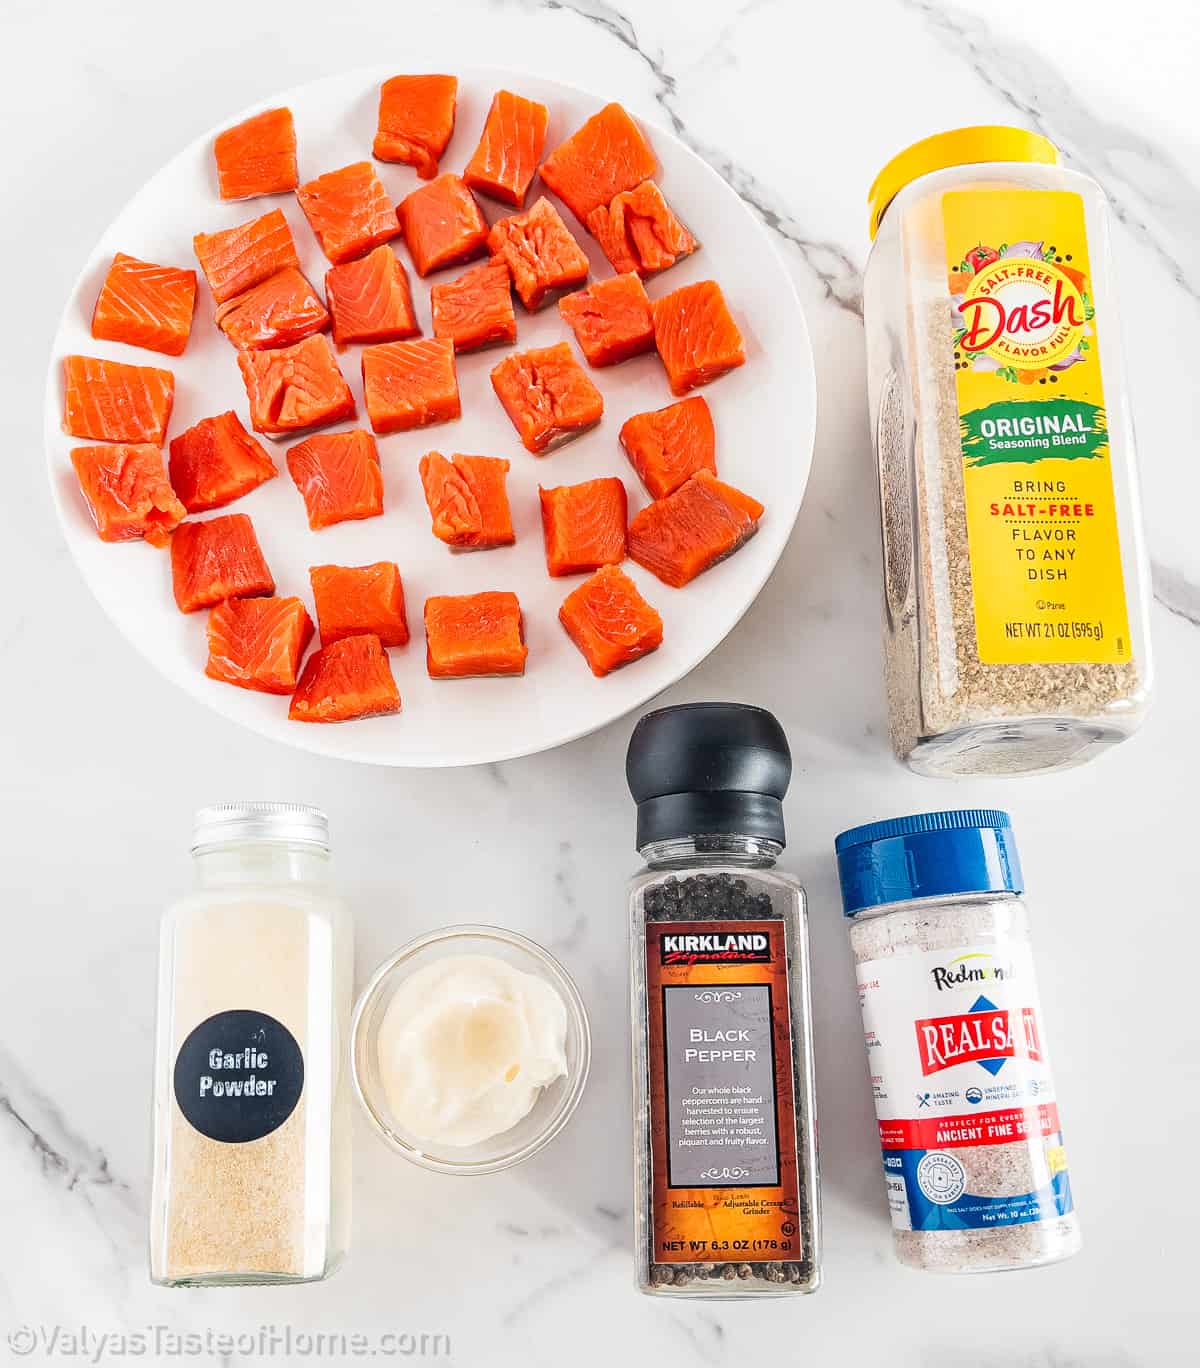 All you need are some simple pantry staple ingredients to make this salmon bites recipe at home.